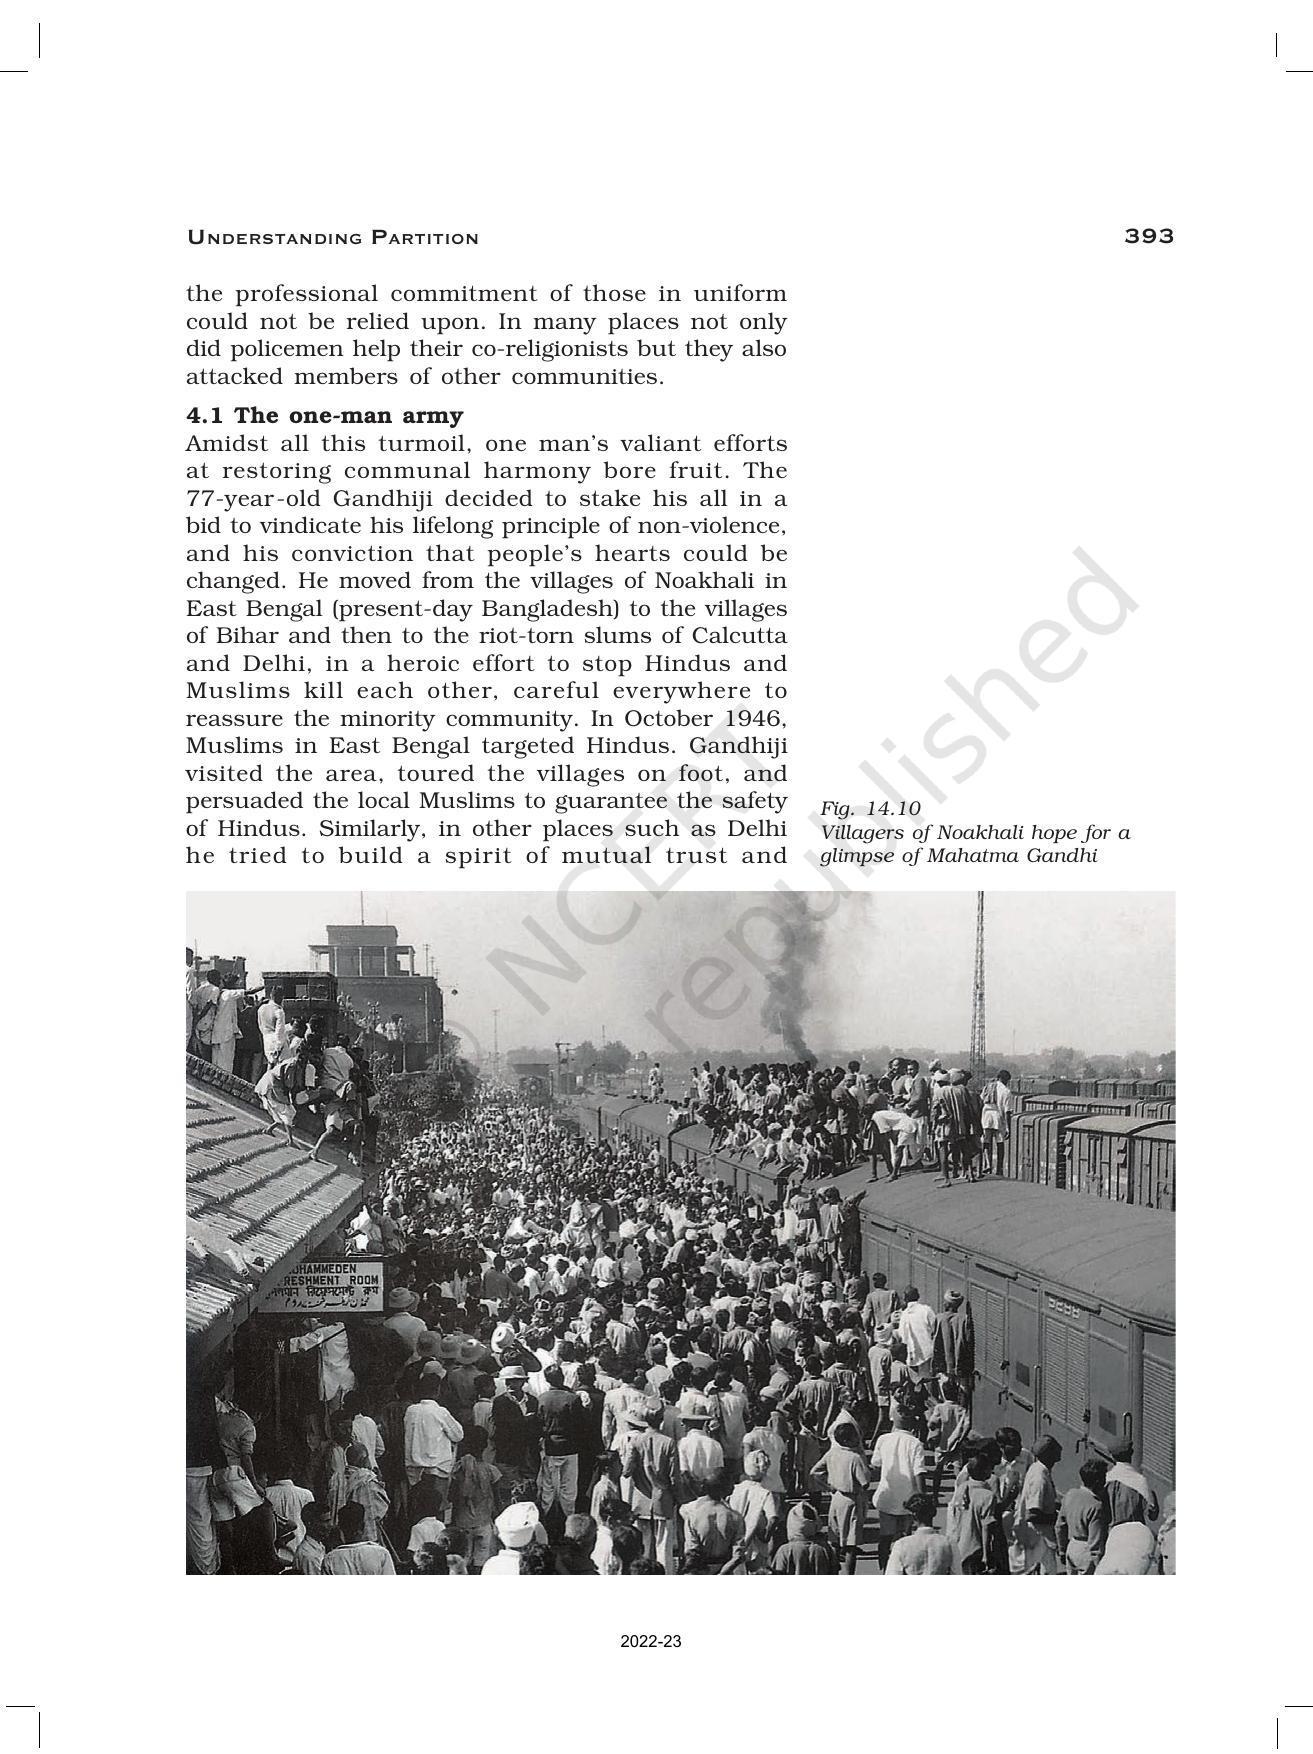 NCERT Book for Class 12 History (Part-III) Chapter 14 Understanding Partition - Page 18